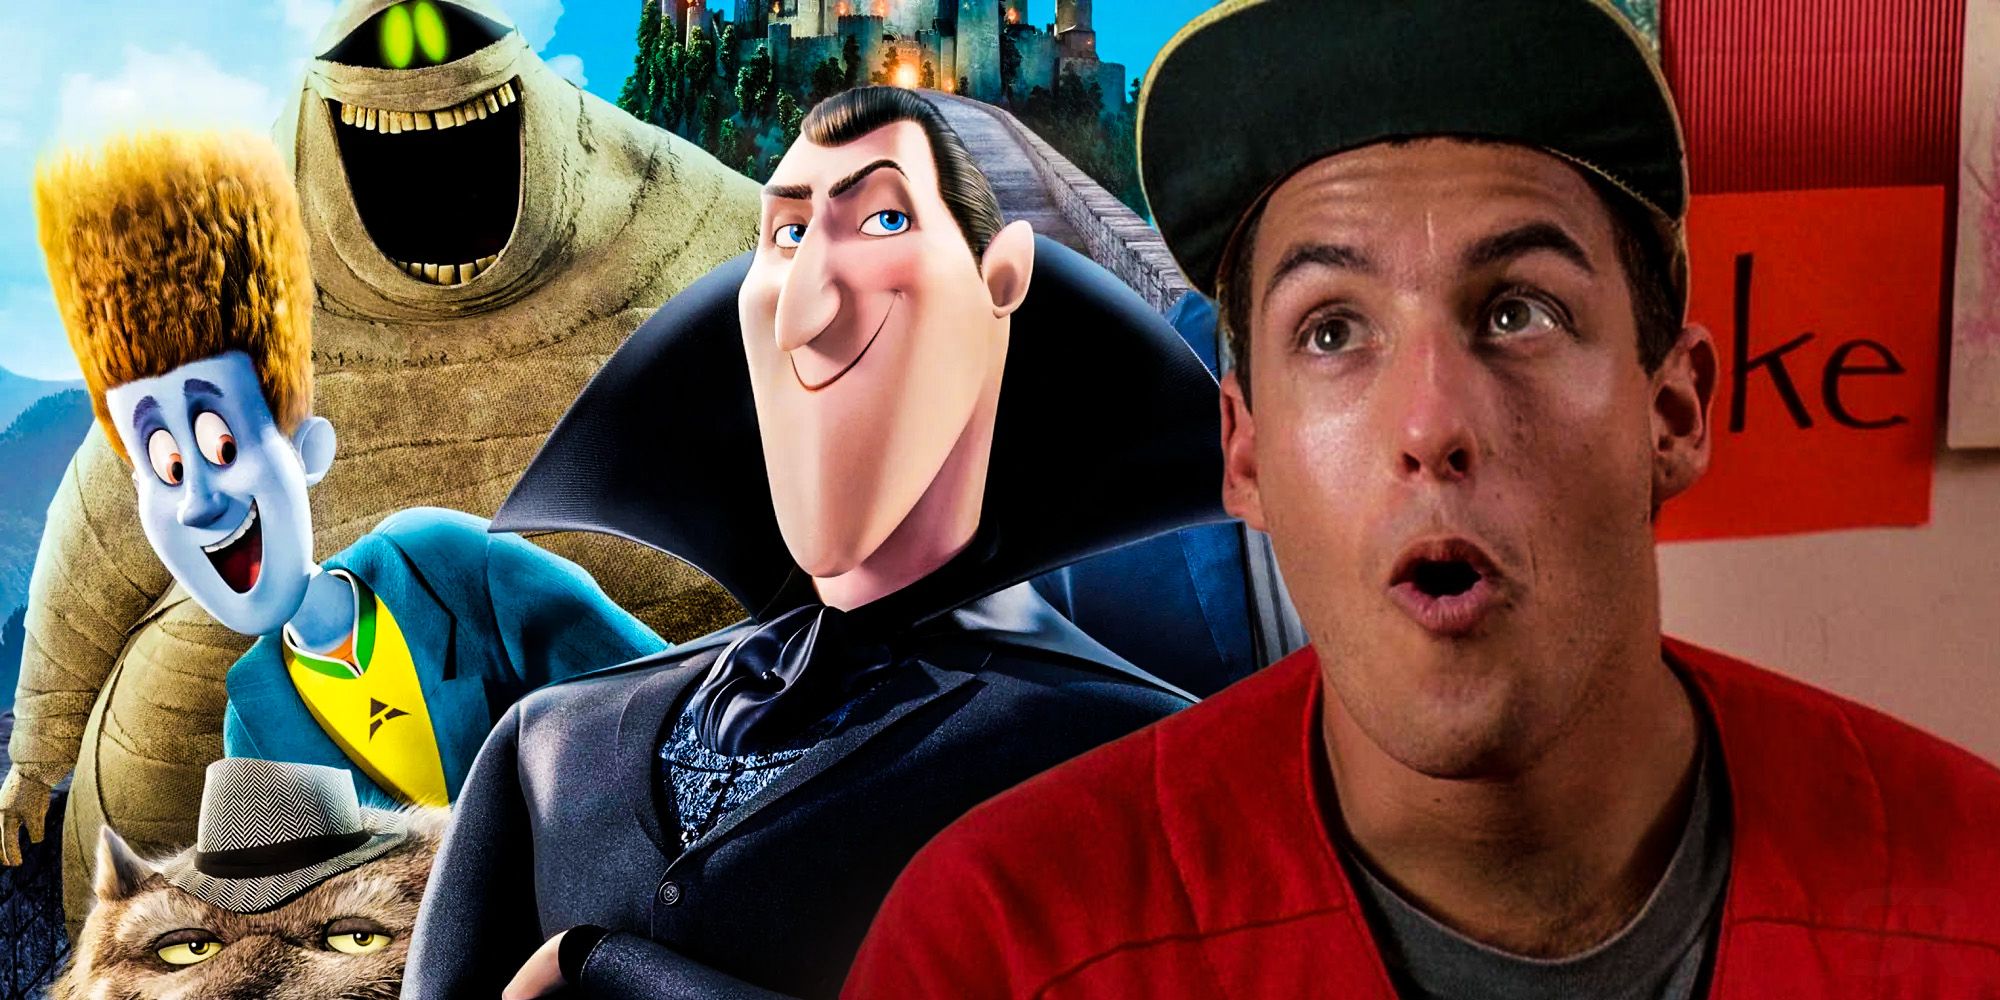 The Hotel Transylvania Movies Hold An Adam Sandler Record That May Never Be Broken